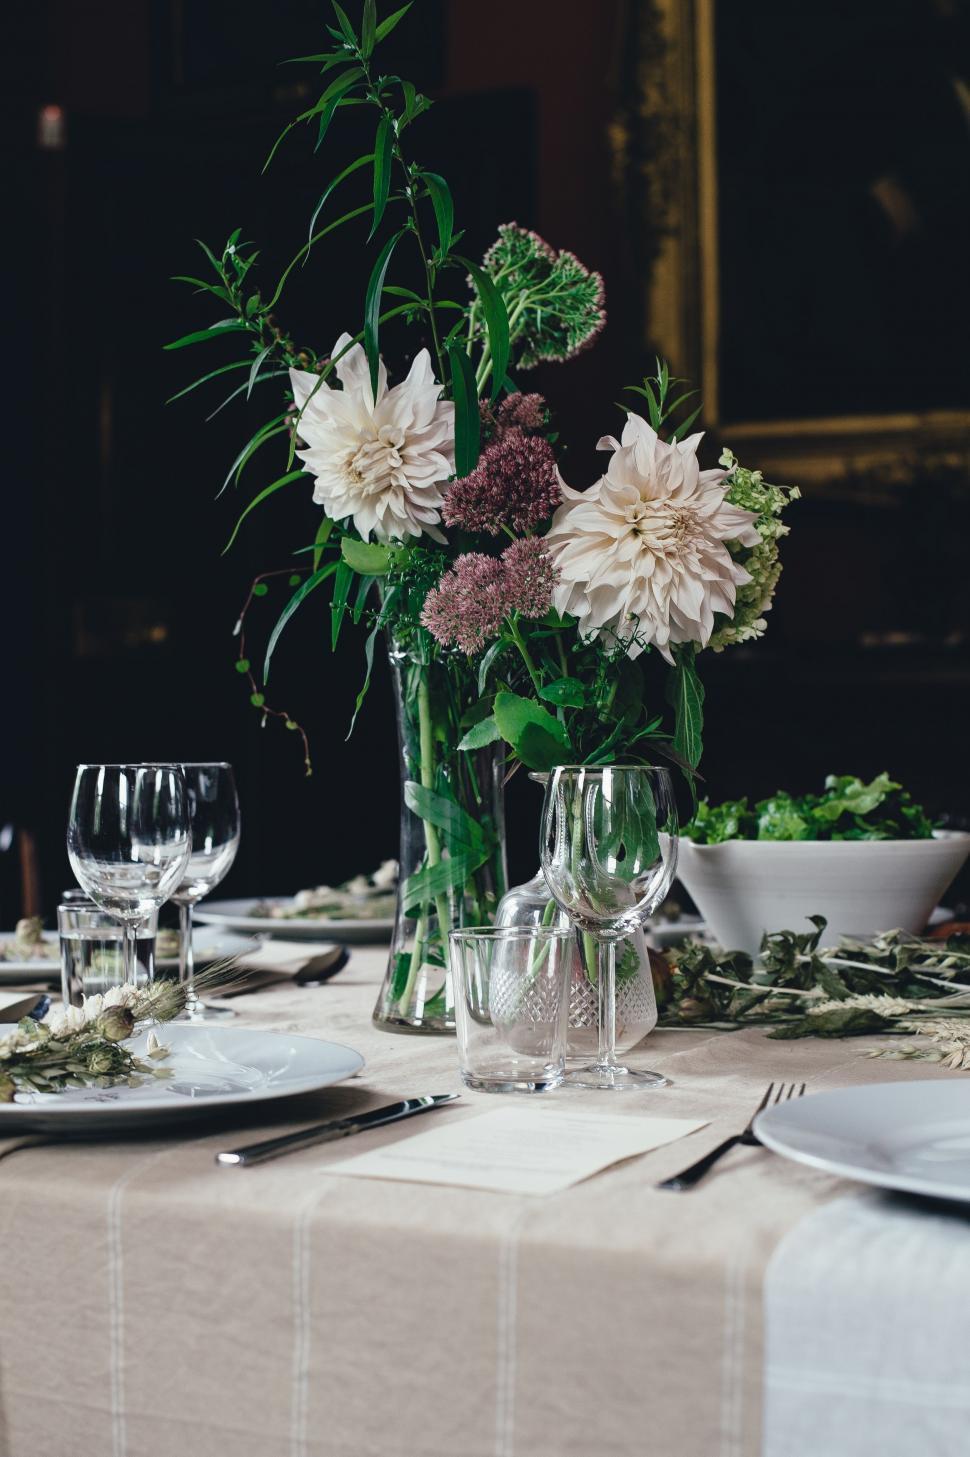 Free Image of Flowers on dining table  